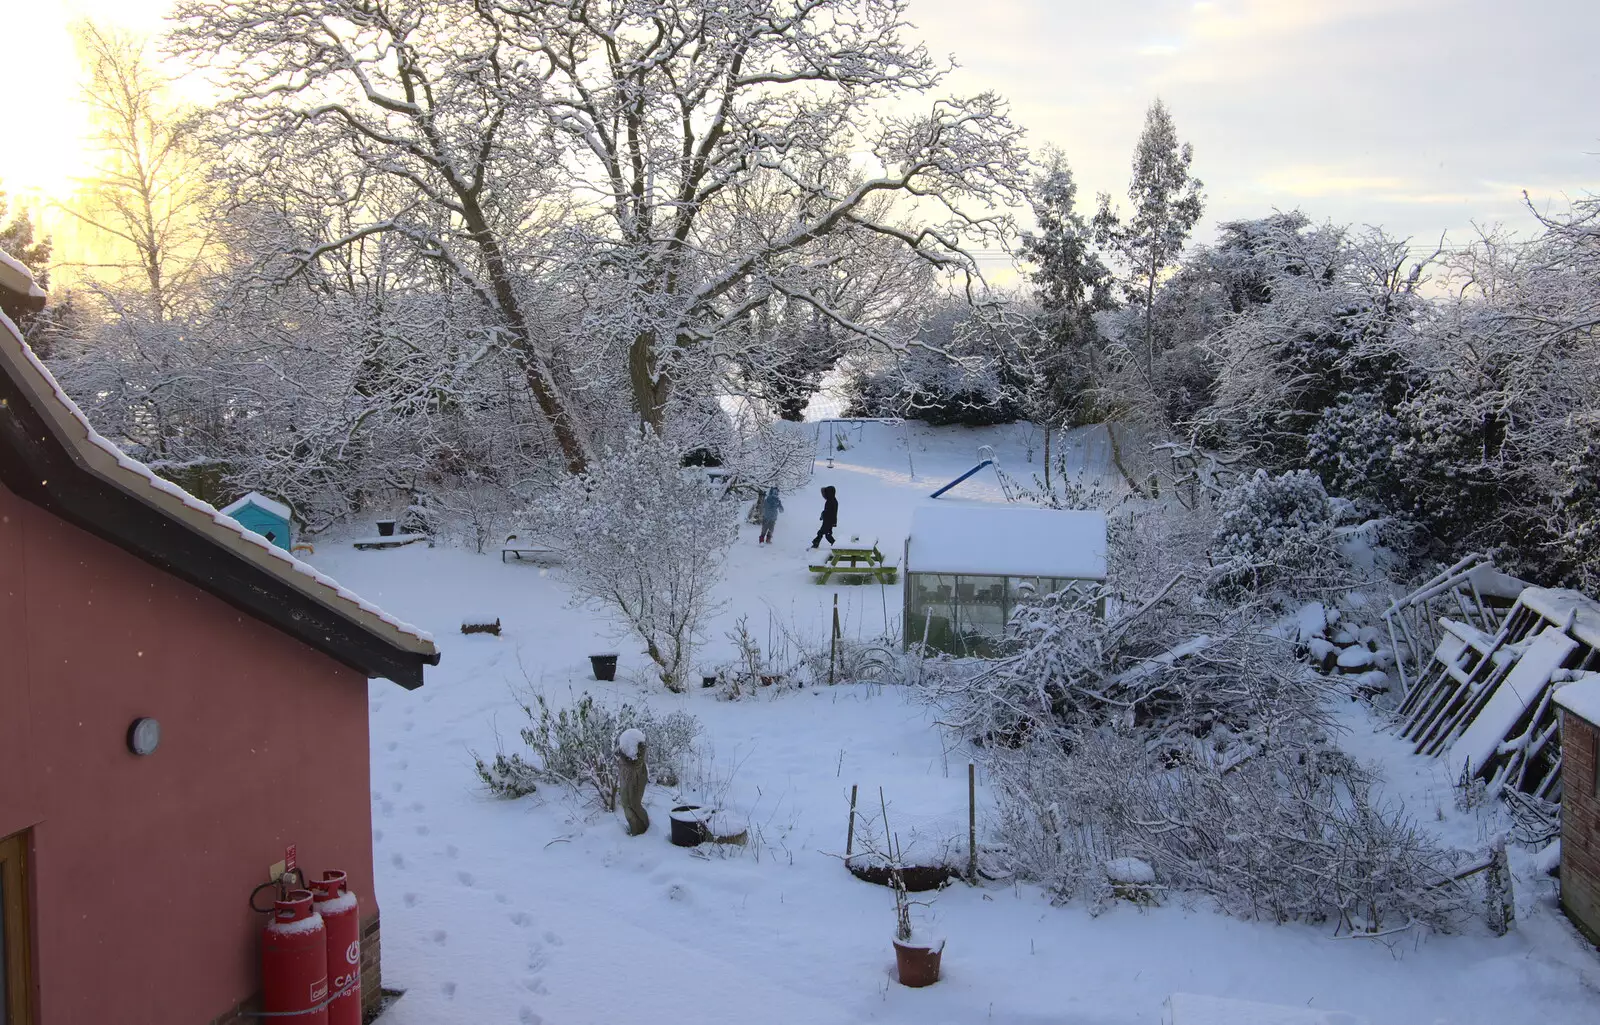 The boys are in the garden, from Snowmageddon: The Beast From the East, Suffolk and London - 27th February 2018